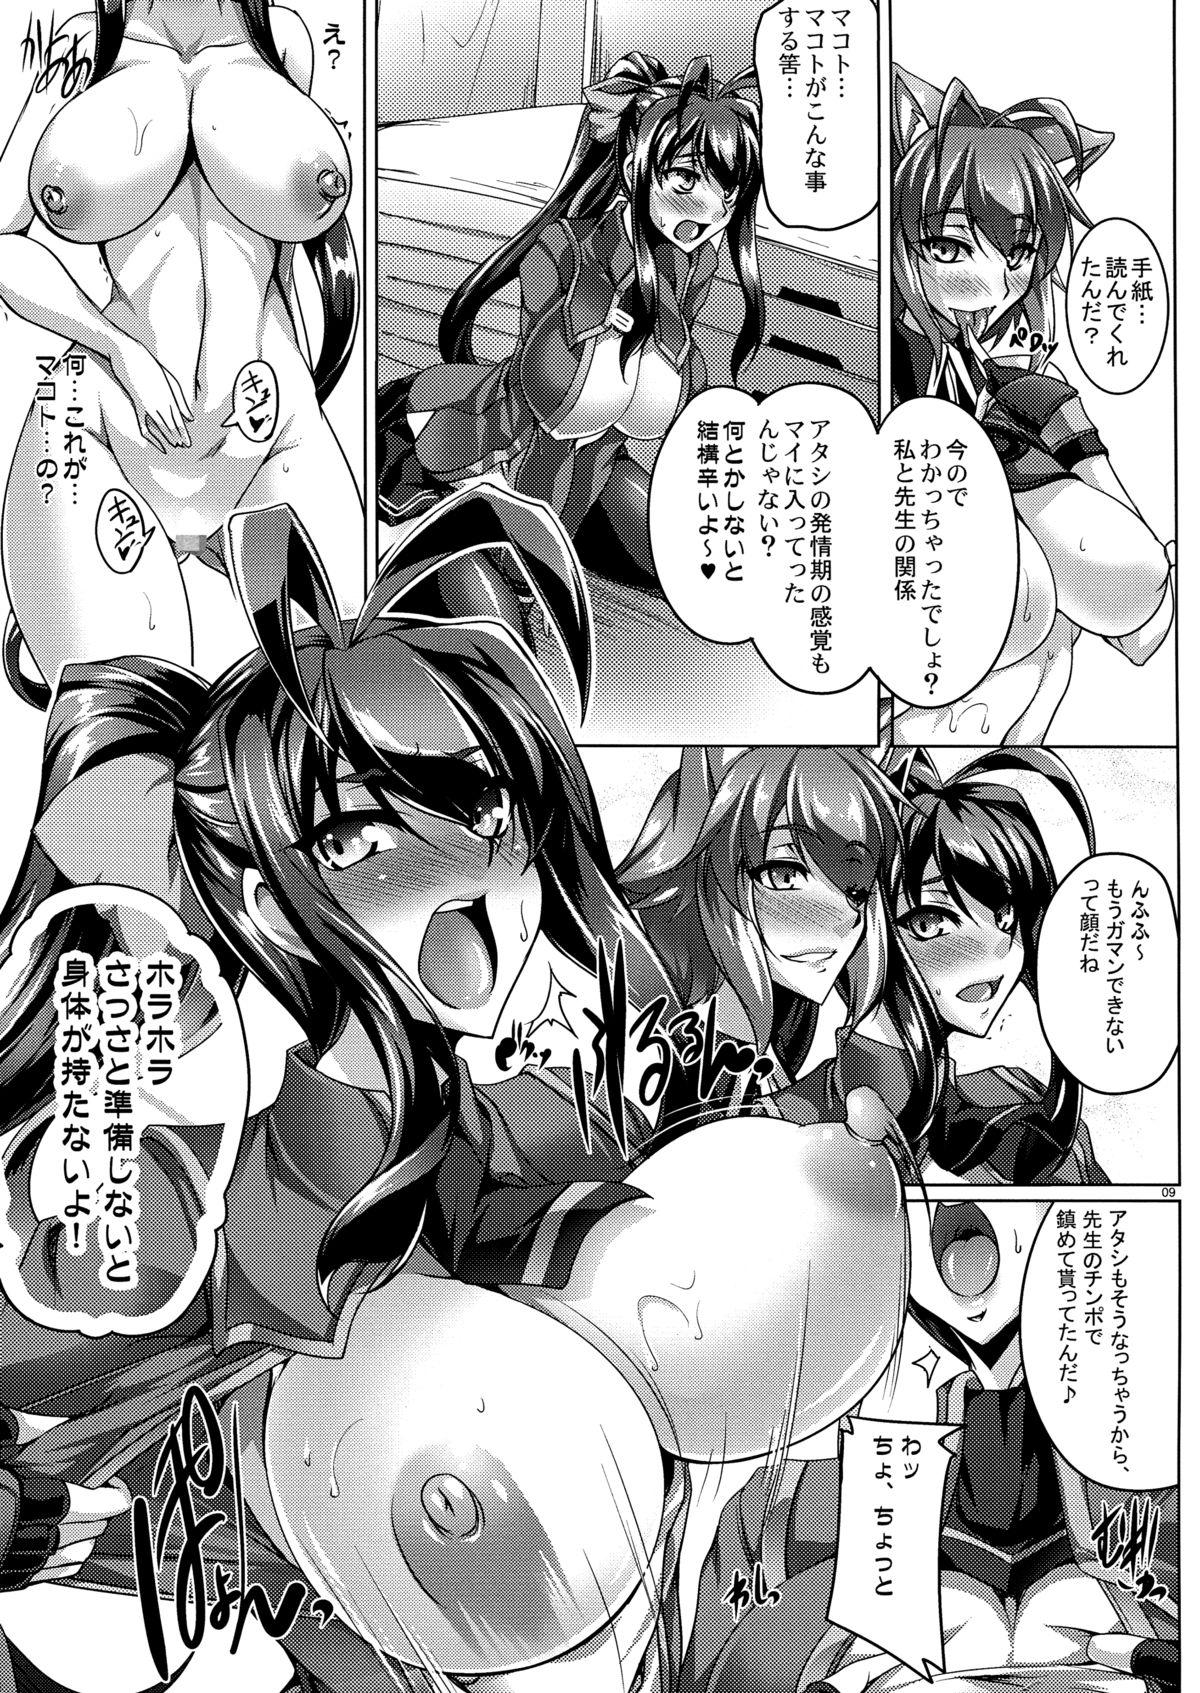 Wet RE MIX MY HEART!! - Blazblue Fishnets - Page 9